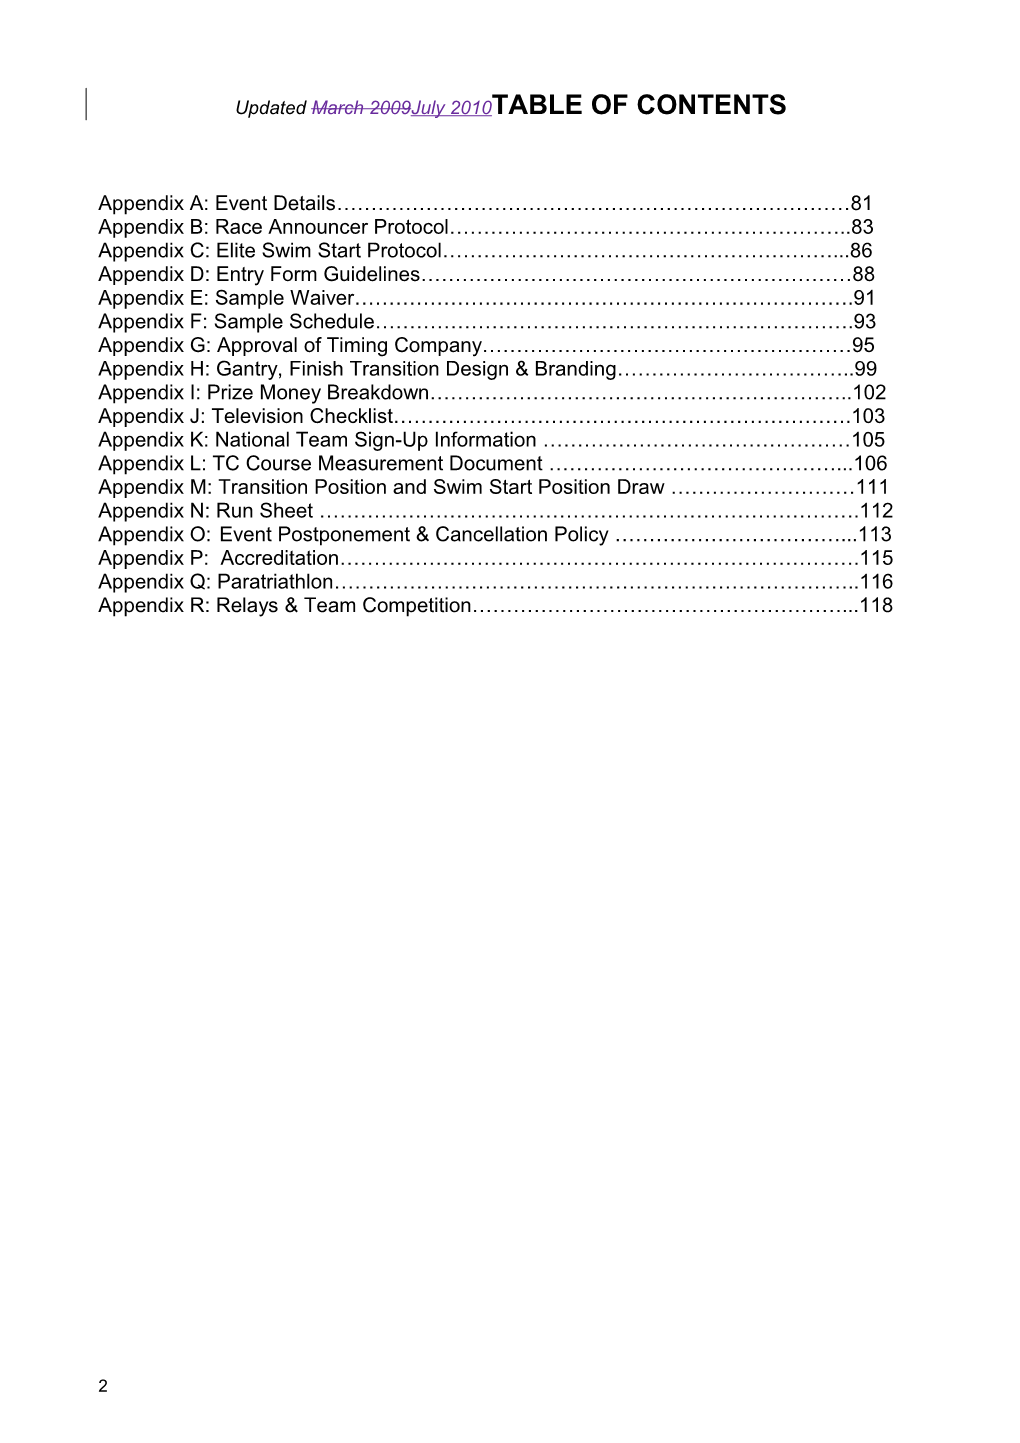 Updated March 2009July 2010 TABLE of CONTENTS